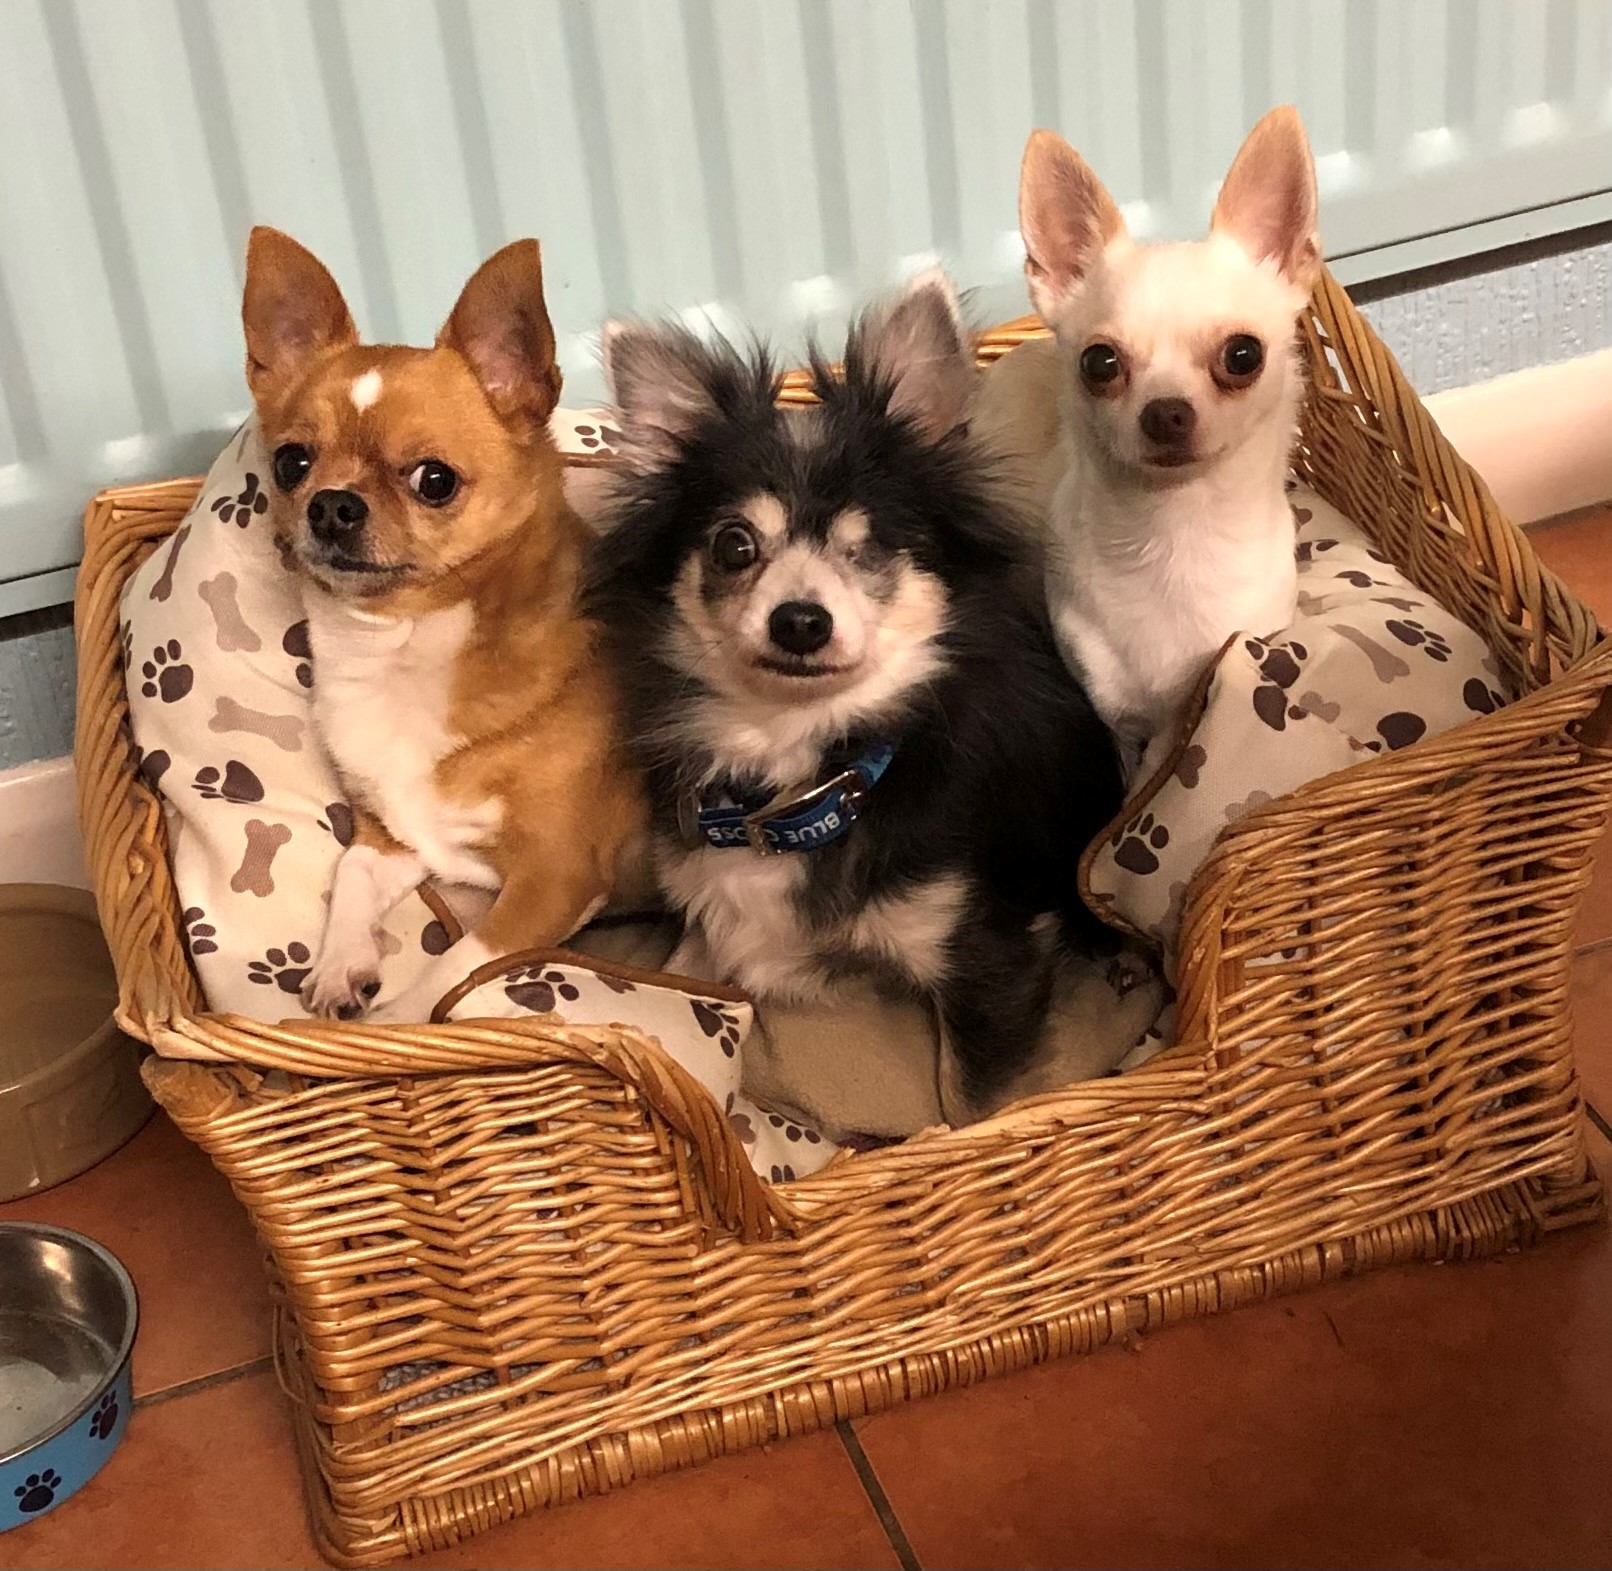 Missy with her two chihuahua friends in foster, all sitting in a dog bed